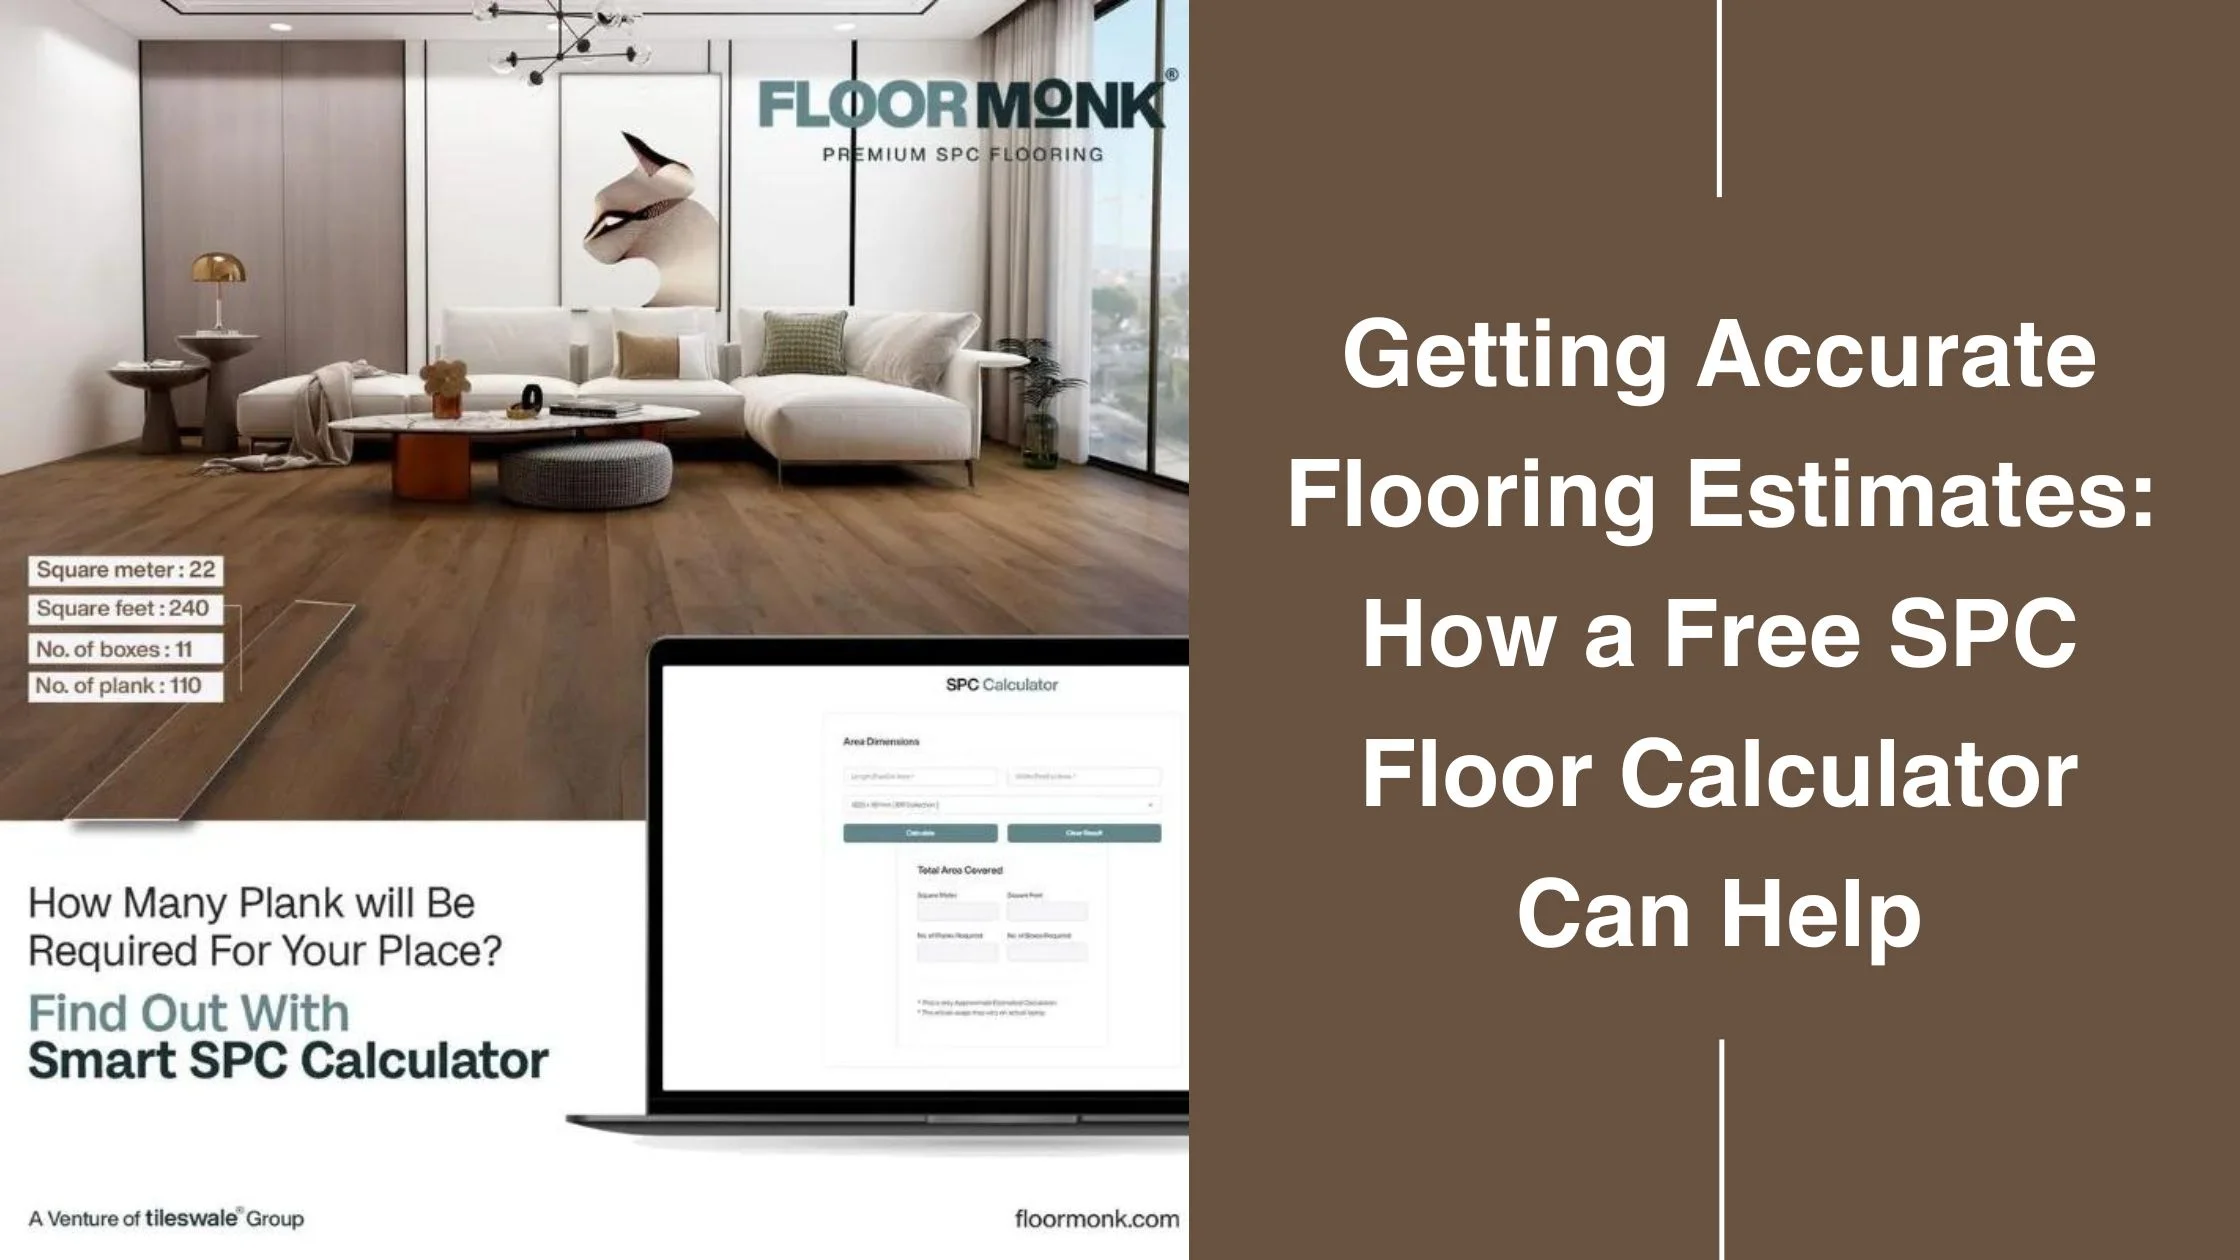 Getting Accurate Flooring Estimates: How A Free SPC Floor Calculator Can Help